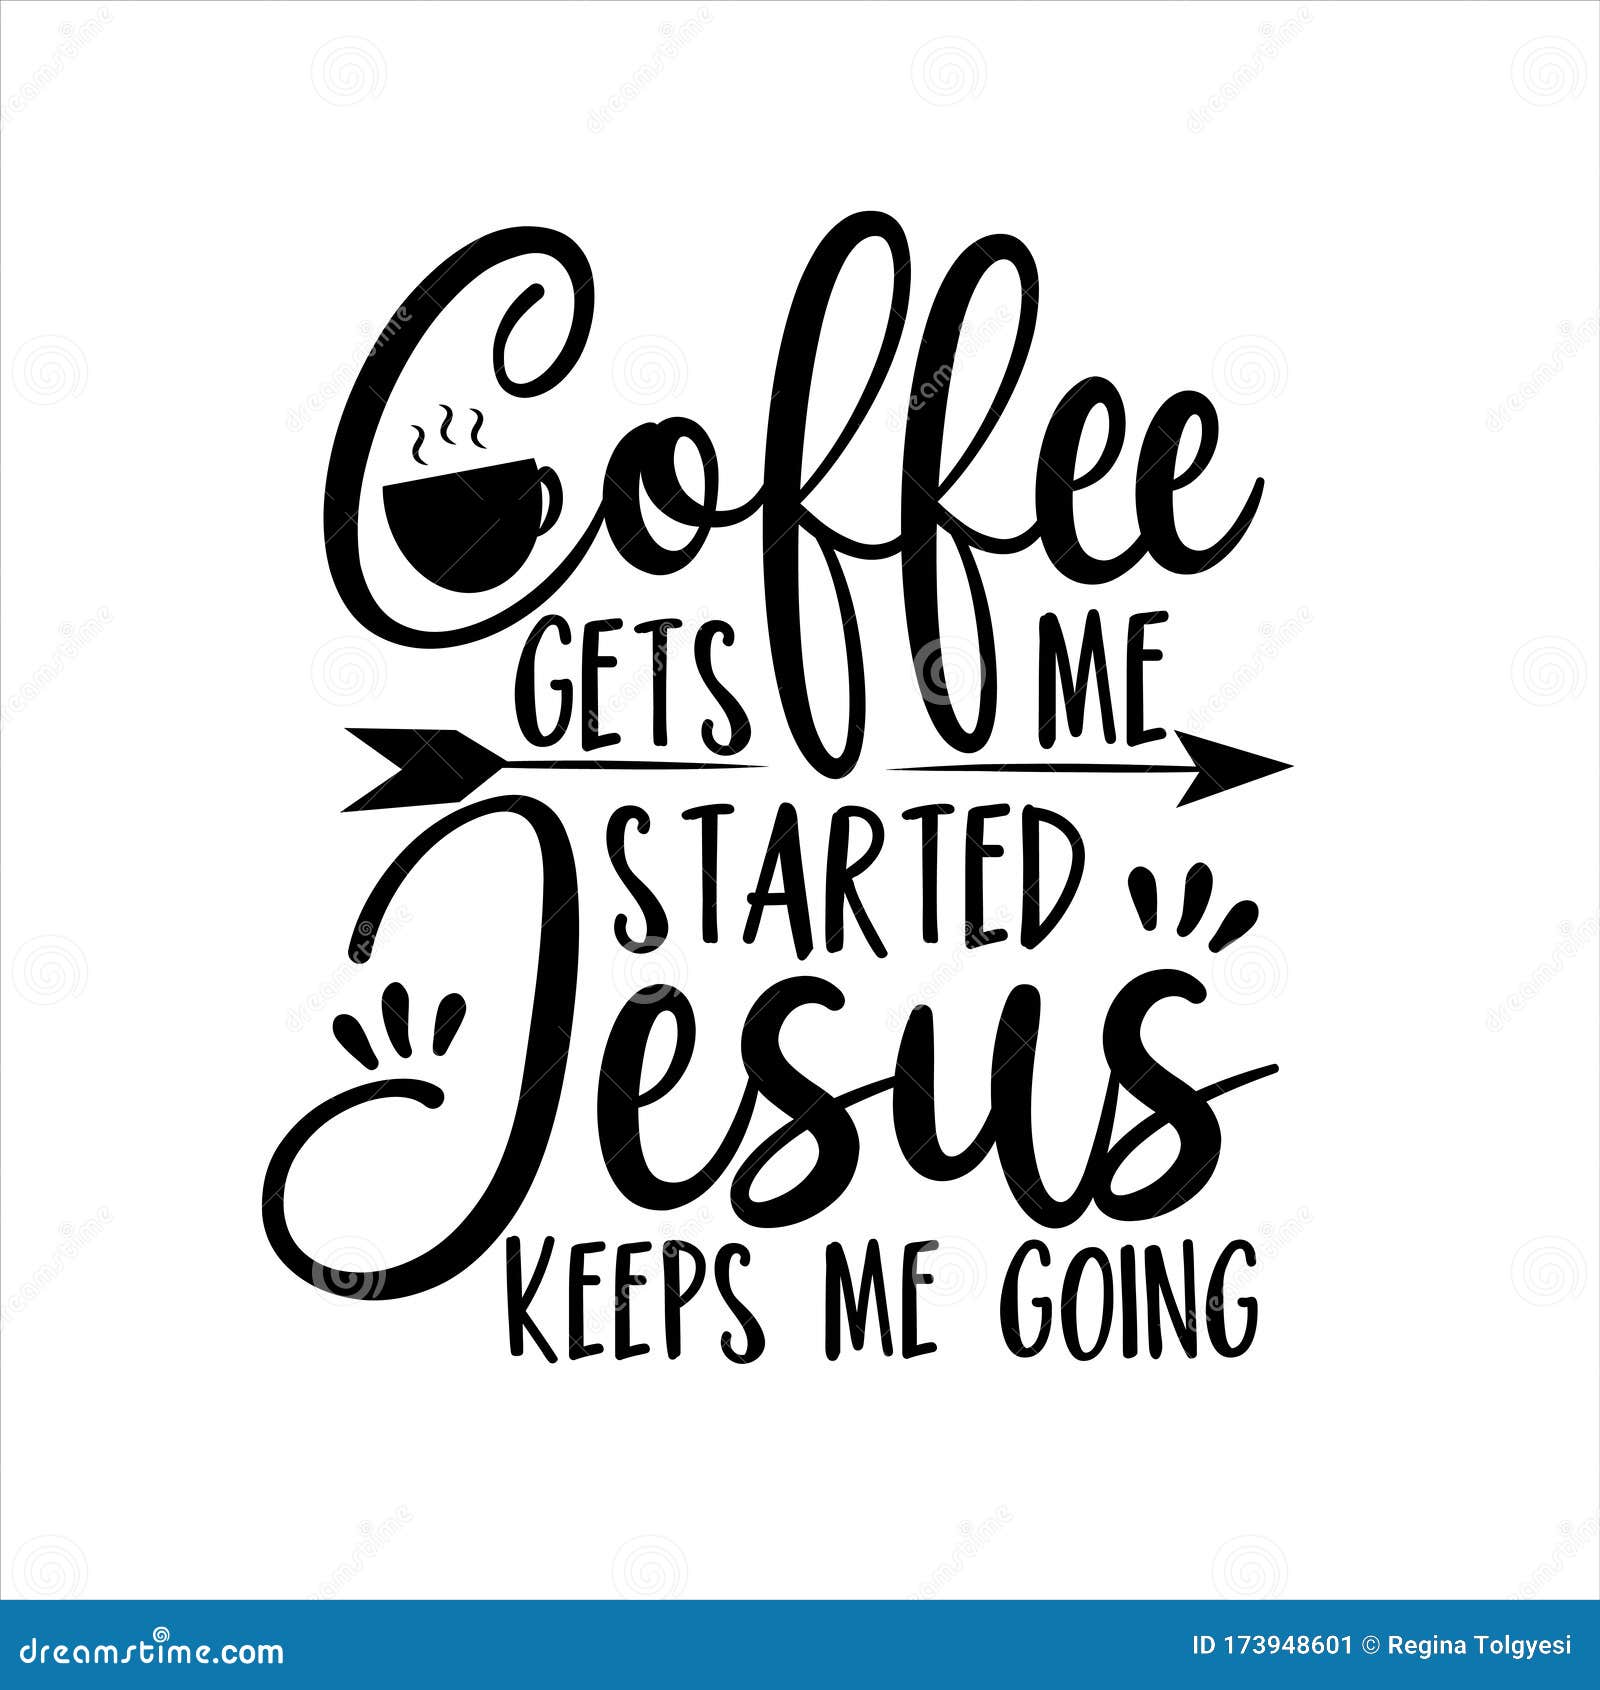 coffee gets me started jesus keeps me going- positive calligraphy